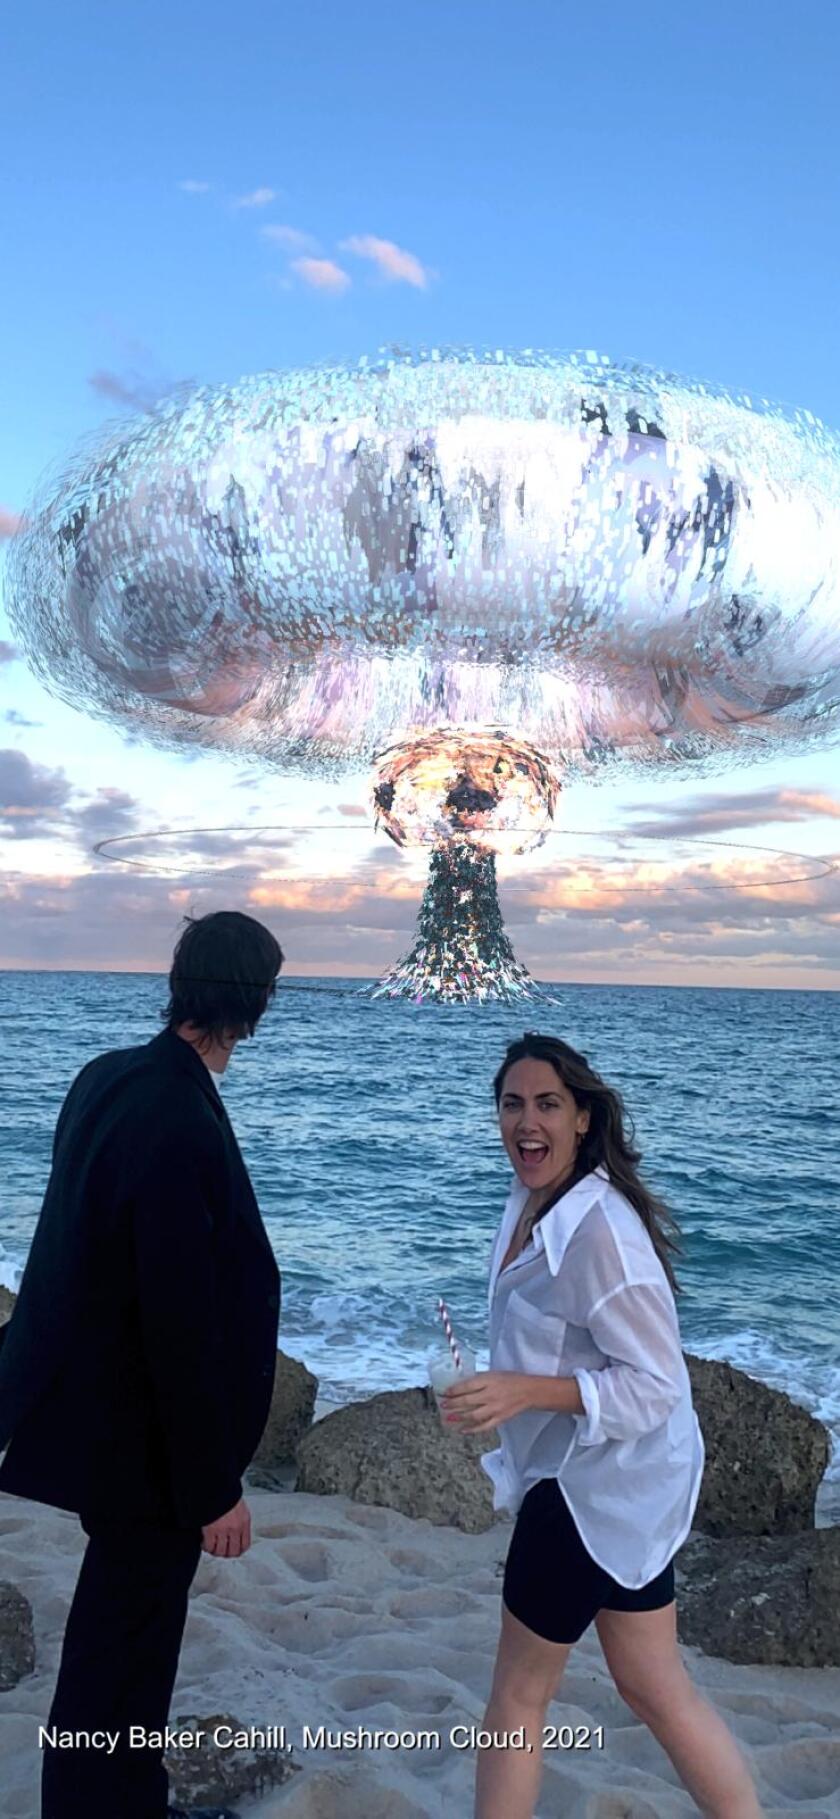 Two people stand in front of Nancy Baker Cahill's "Mushroom Cloud" on the beach in Miami.